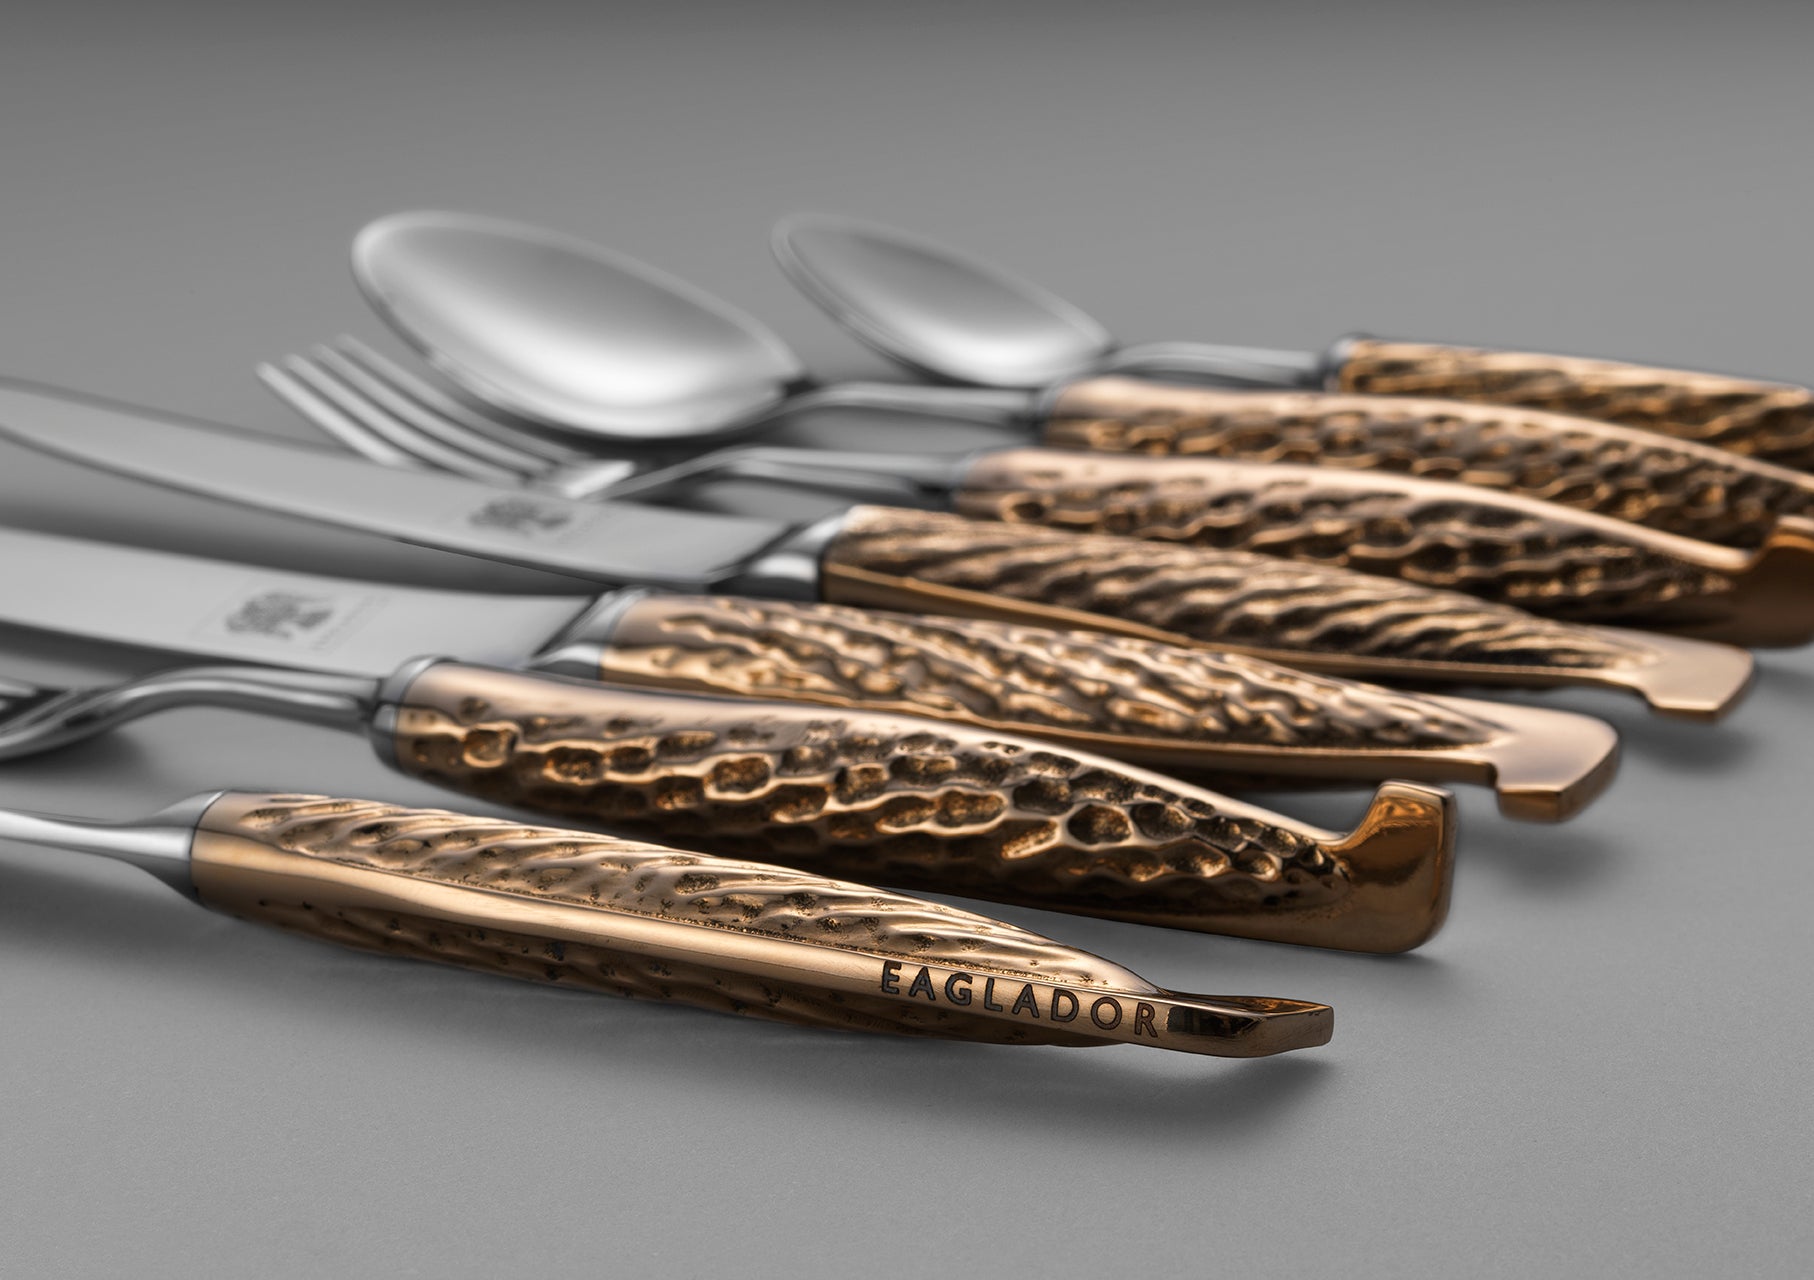 A collection of bronze handled flatware with sculptural detail by Eaglador